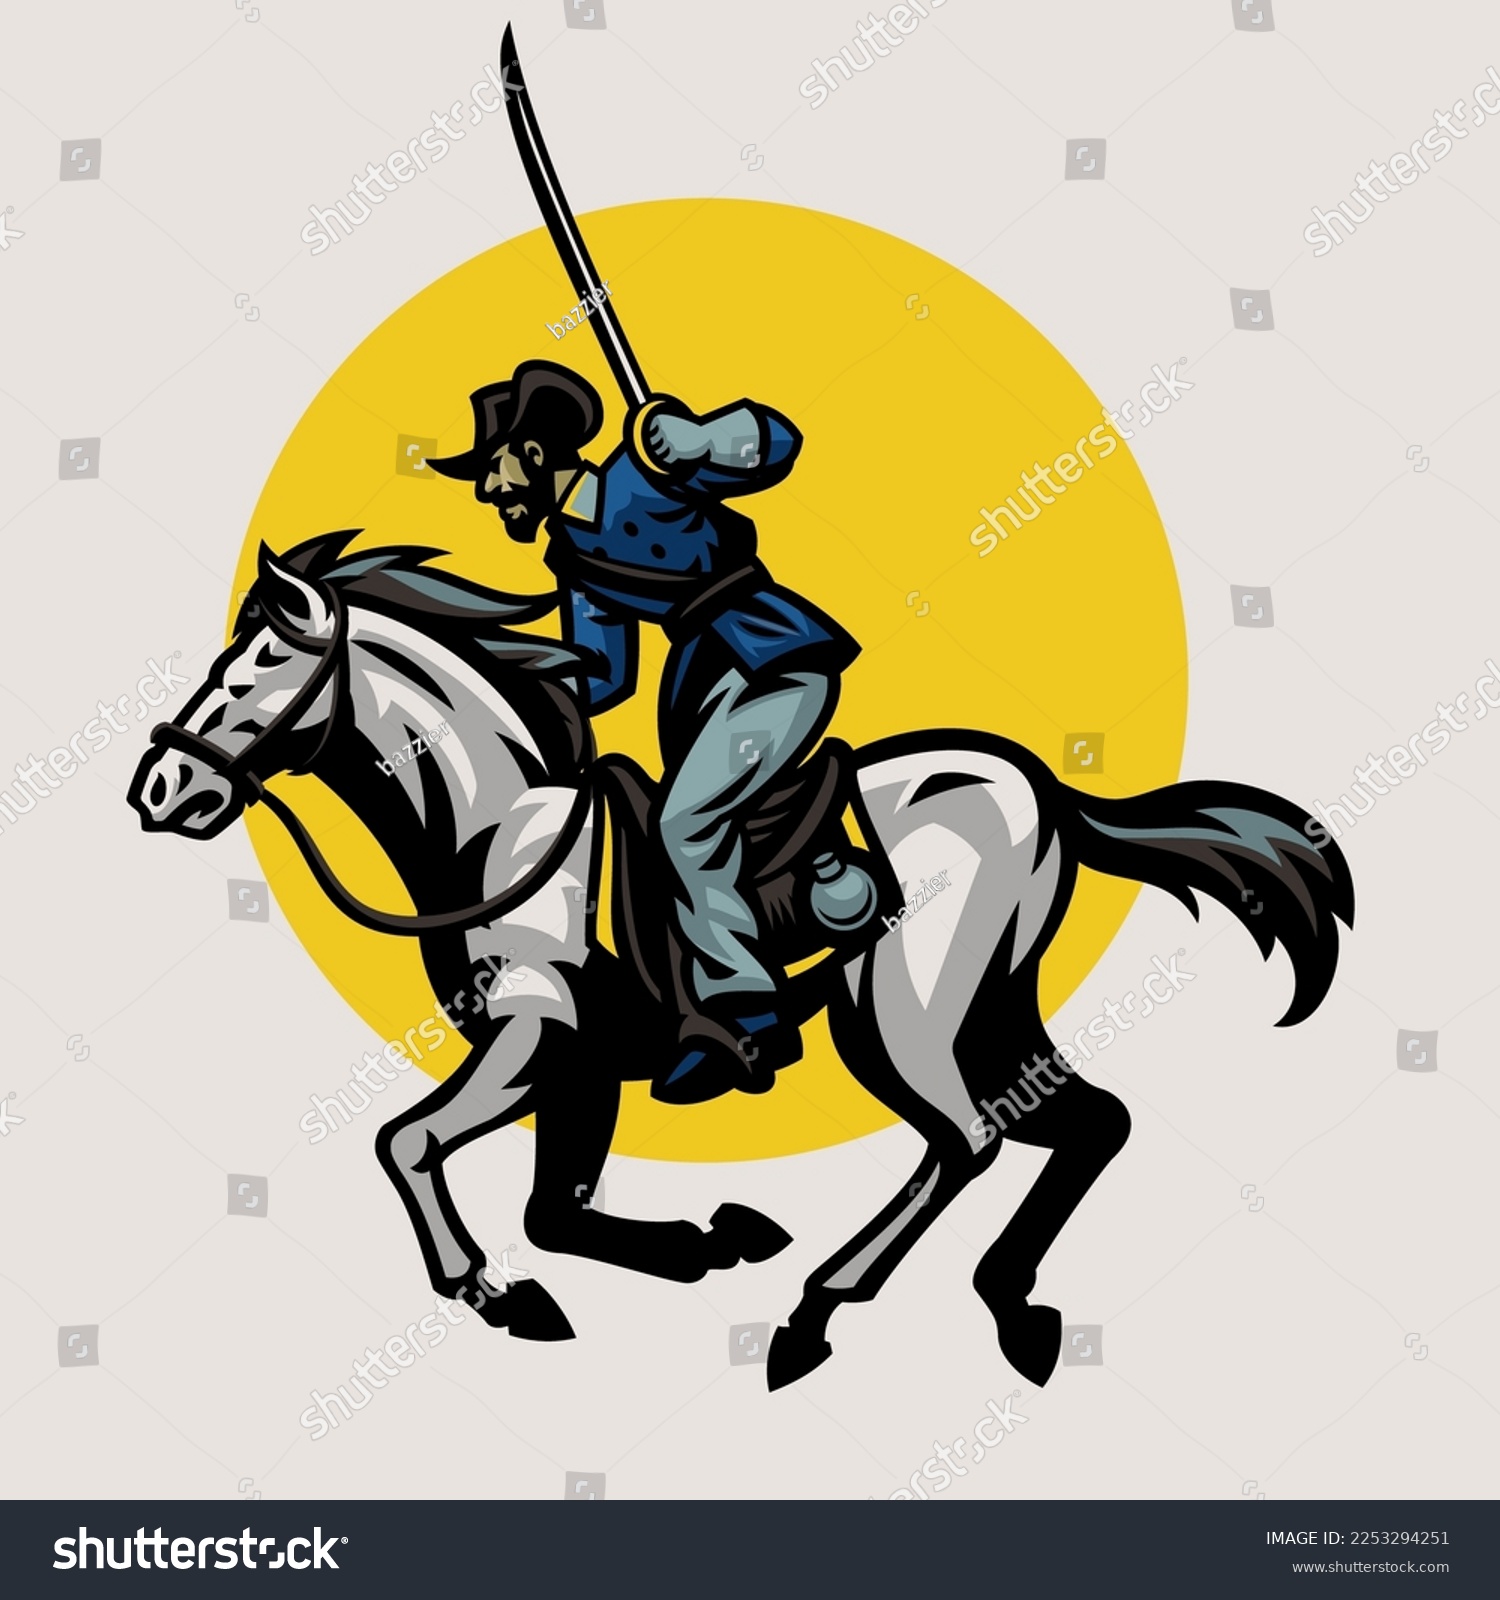 SVG of Civil War Union Sword Soldier Riding the Horse svg